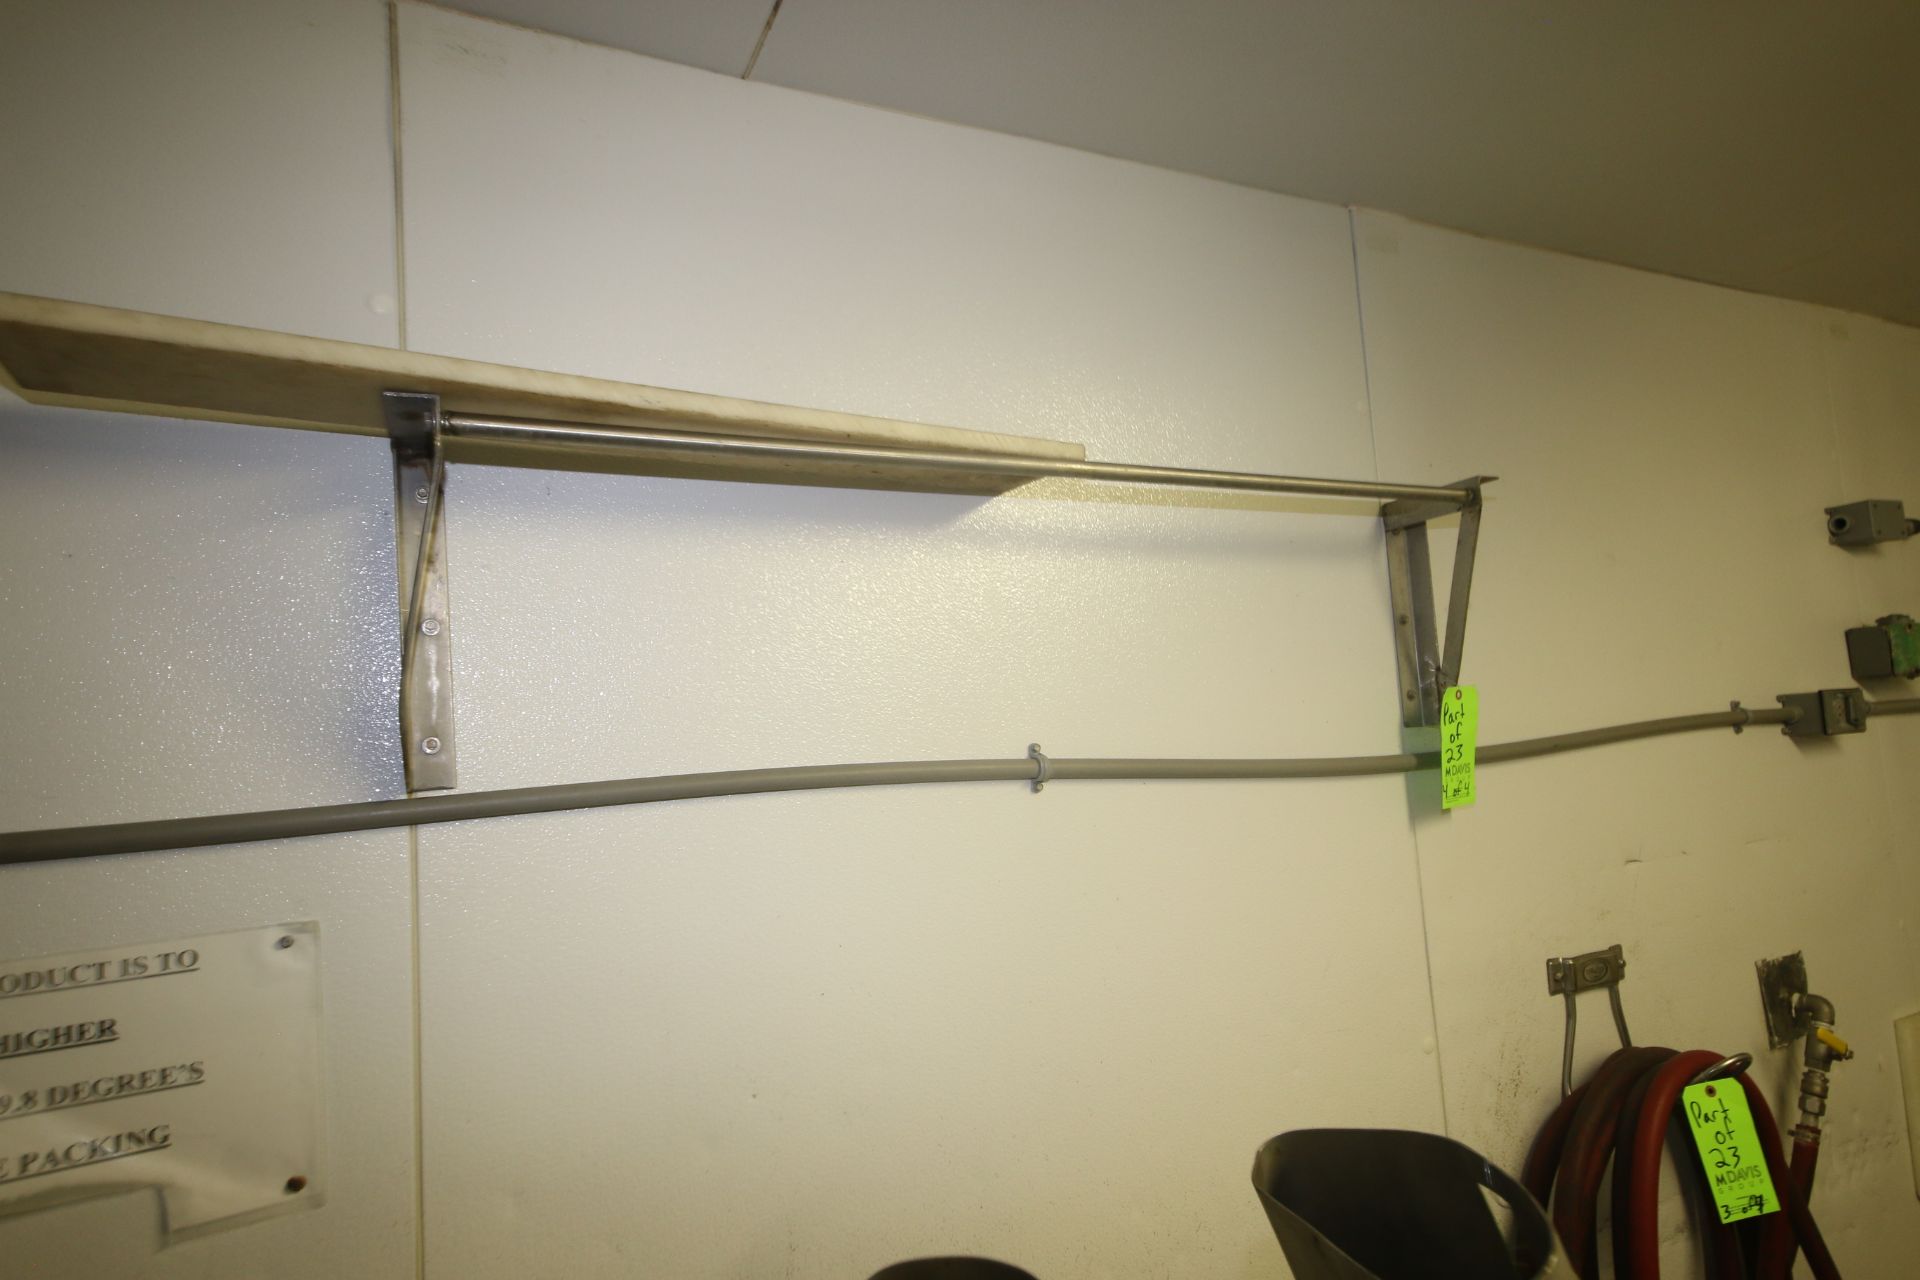 Remaining Contents of Room, Includes (3) Hoses with S/S Wall Mounted, (1) S/S Shelf Frame (Located - Image 3 of 4